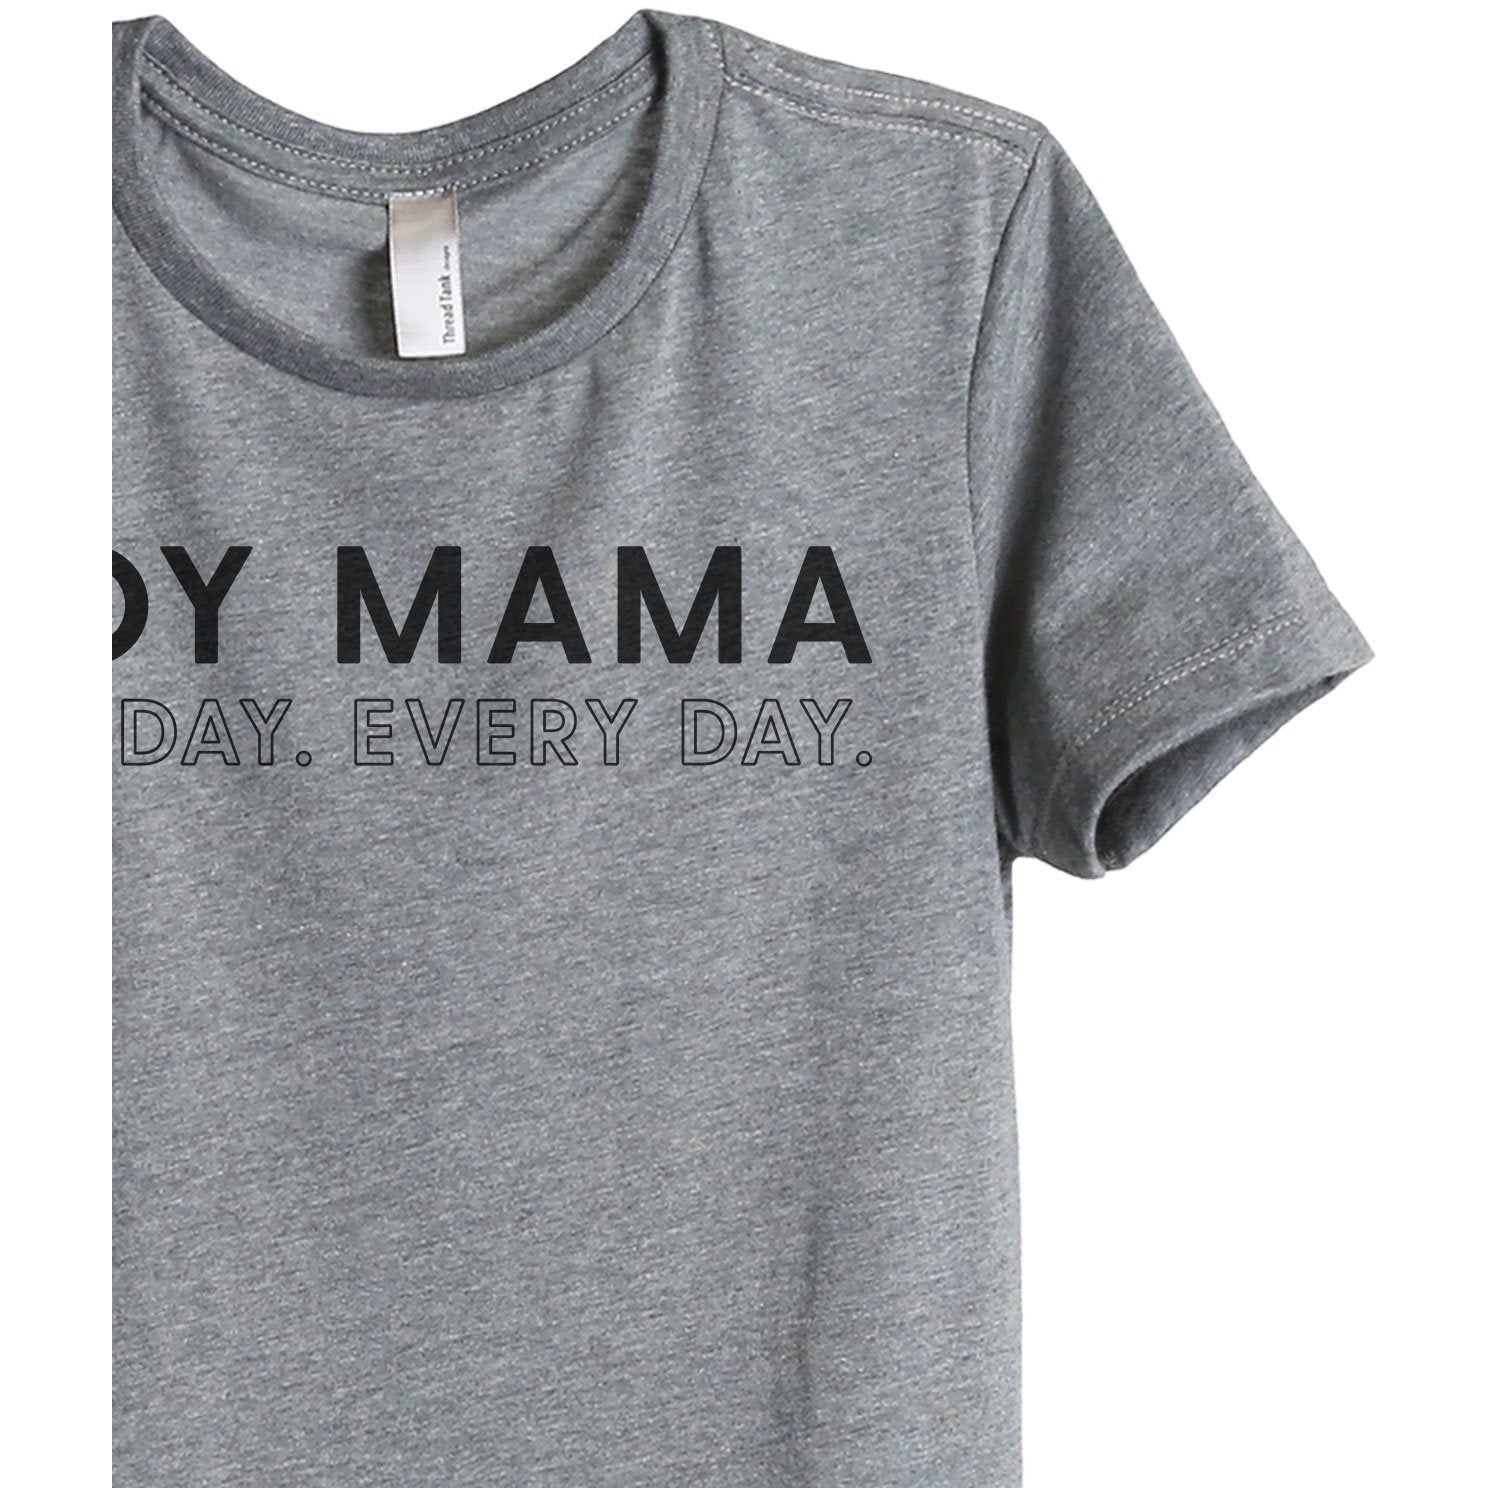 Boy Mama All Day Every Day Women's Relaxed Crewneck T-Shirt Top Tee Heather Grey Zoom Details
